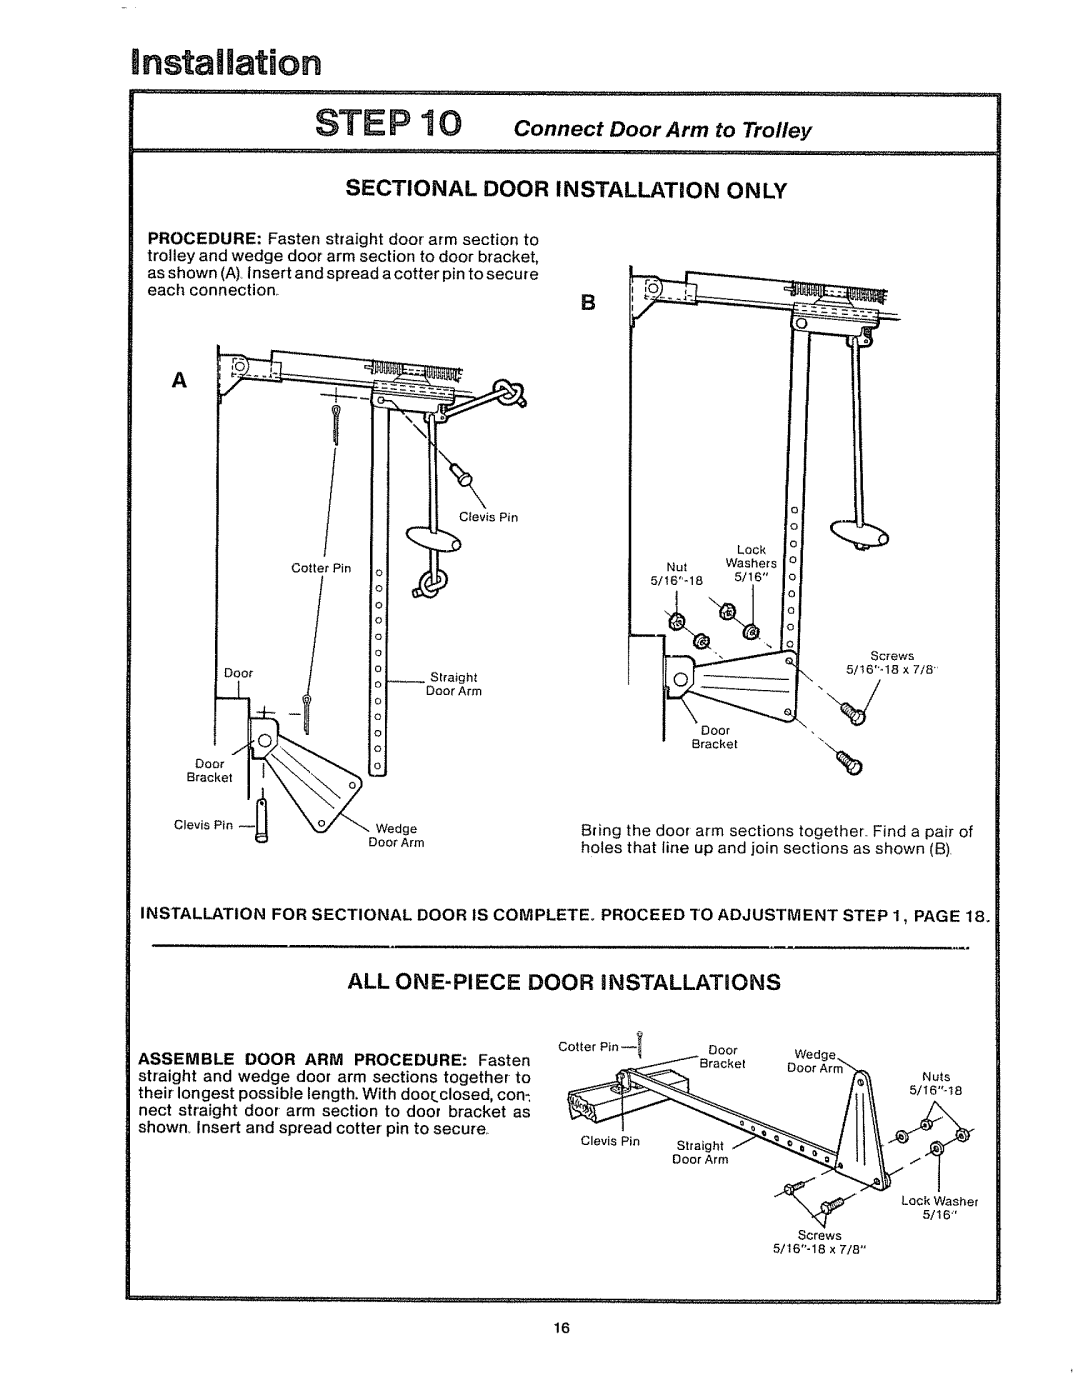 Craftsman 39535006 instalation, Do,,, /1 I1--- Straight, Sectional Door Installation Only, Connect Door Arm to Trolley 